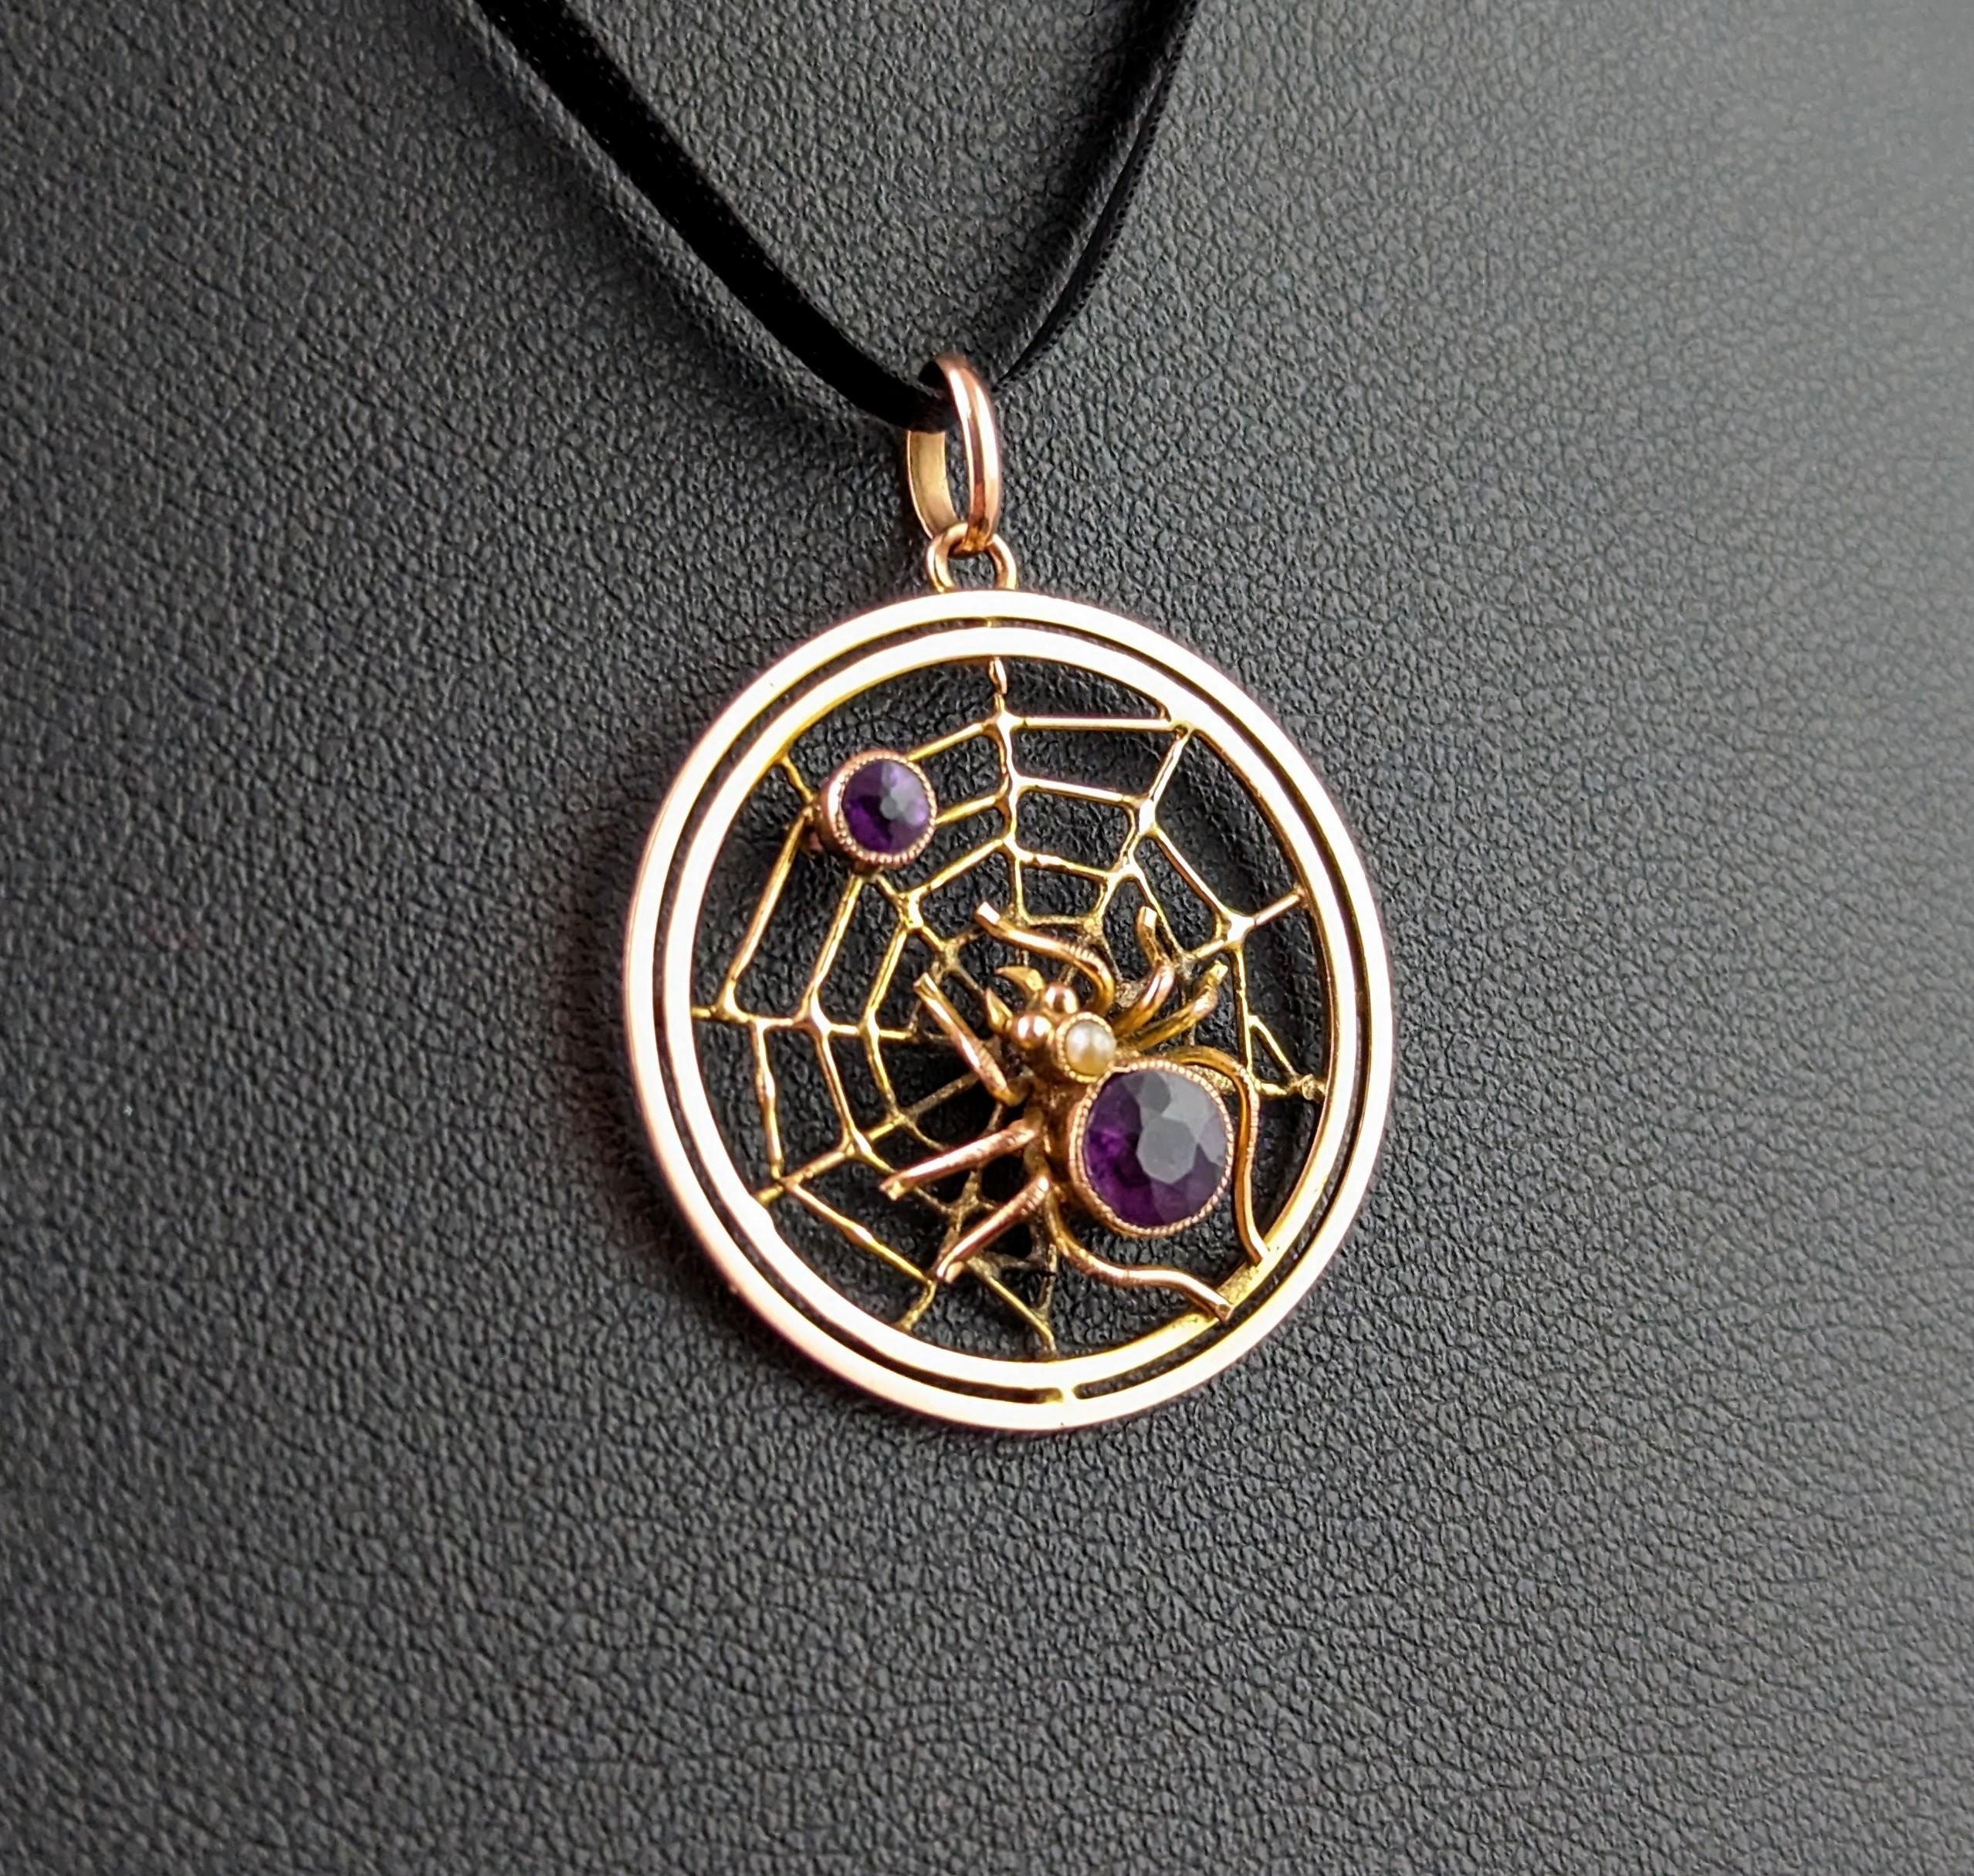 Antique Spider and Web pendant, Amethyst and Pearl, 9kt gold, Edwardian  6